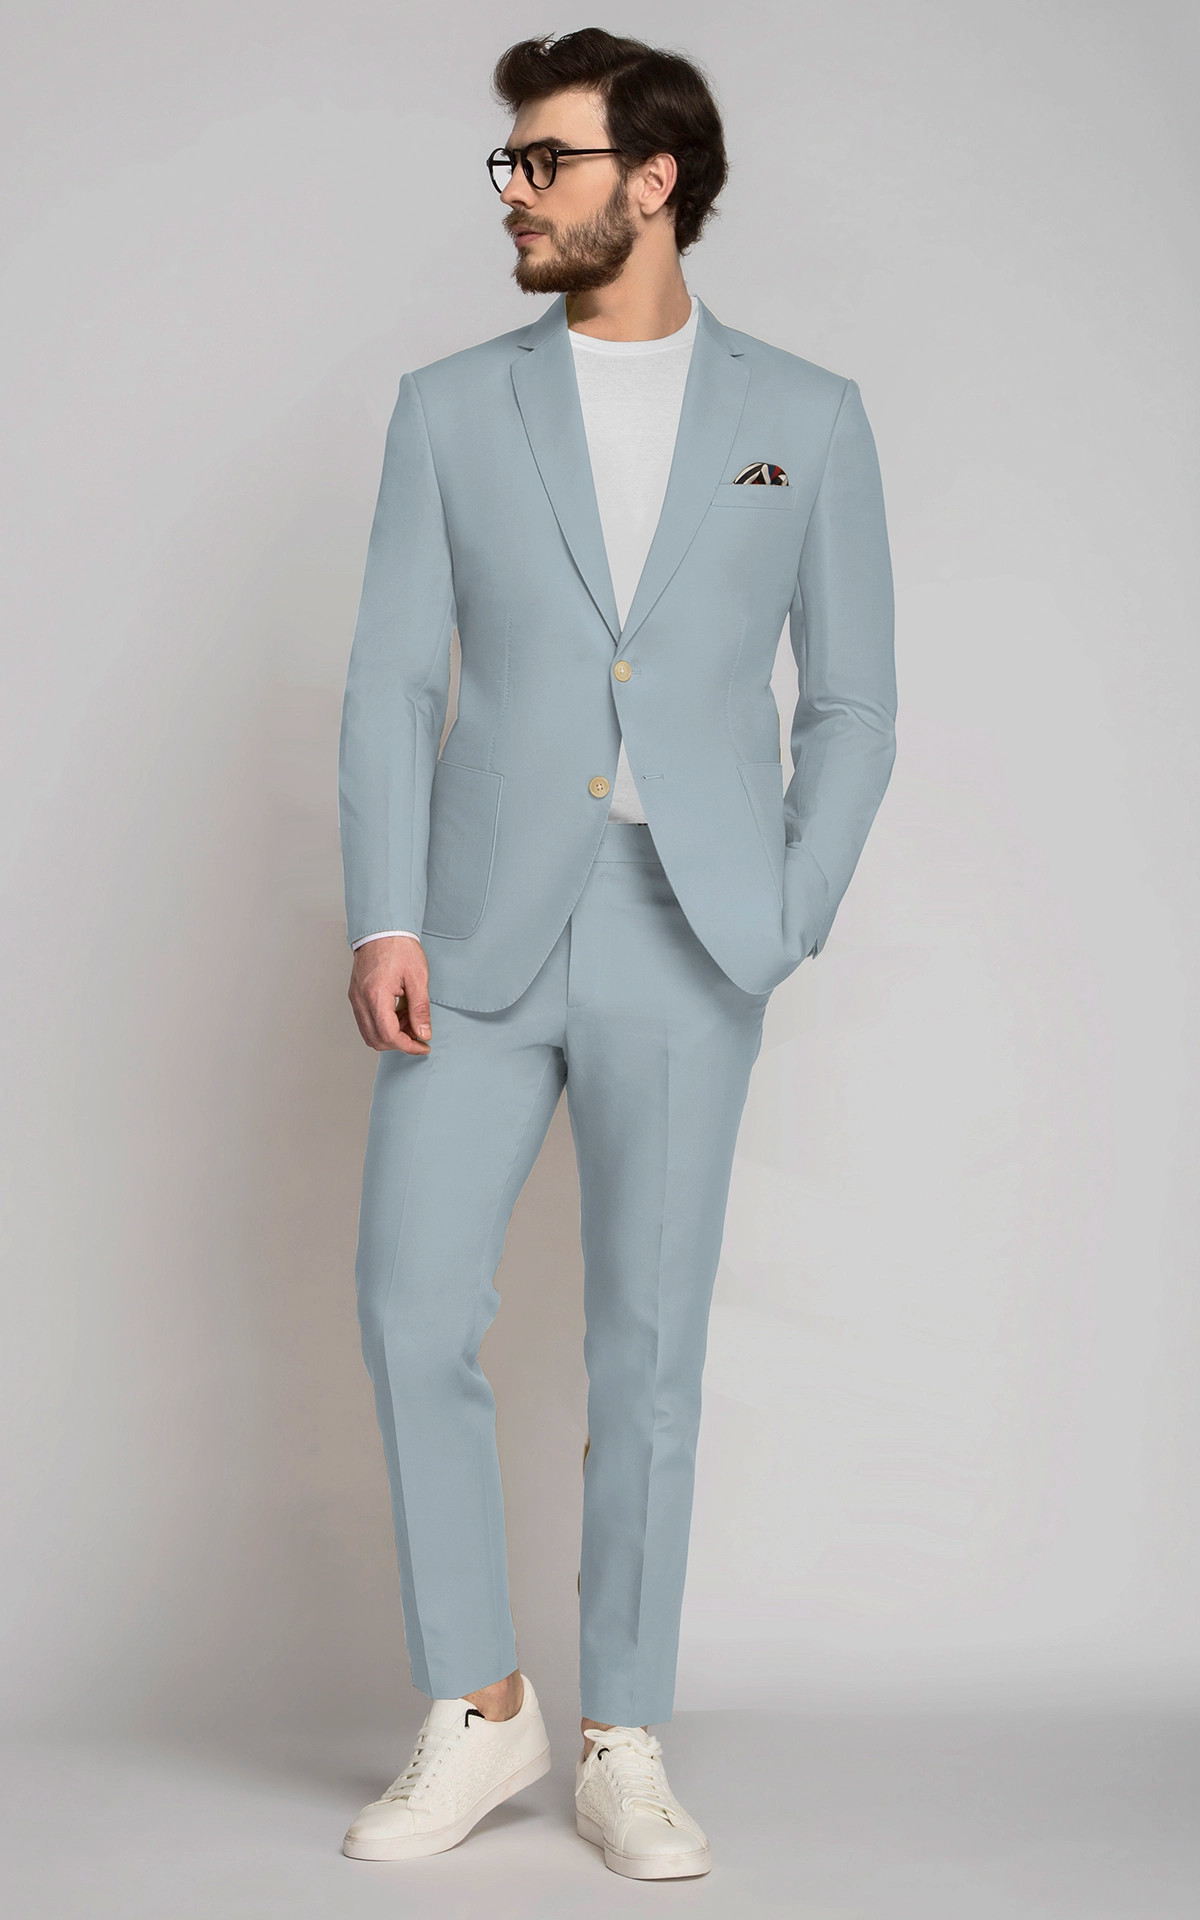 Bring in 2022 With The Most Suave Suits & Blazers | Van Heusen Blog